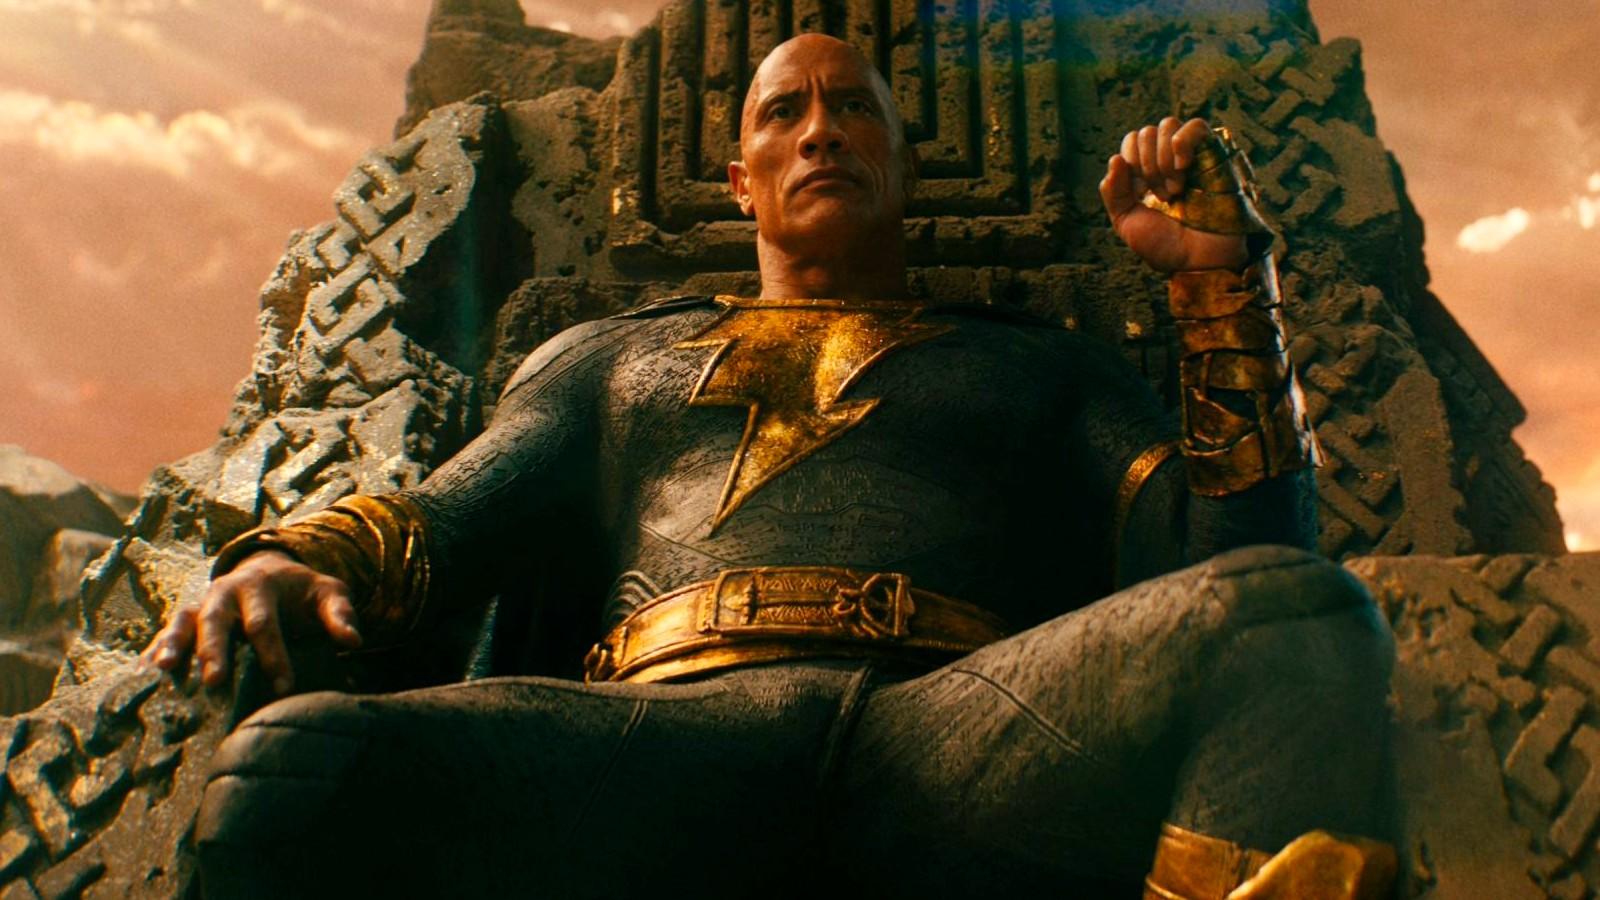 Not Even Dwayne Johnson Can Save 'Black Adam' From Its Rotten